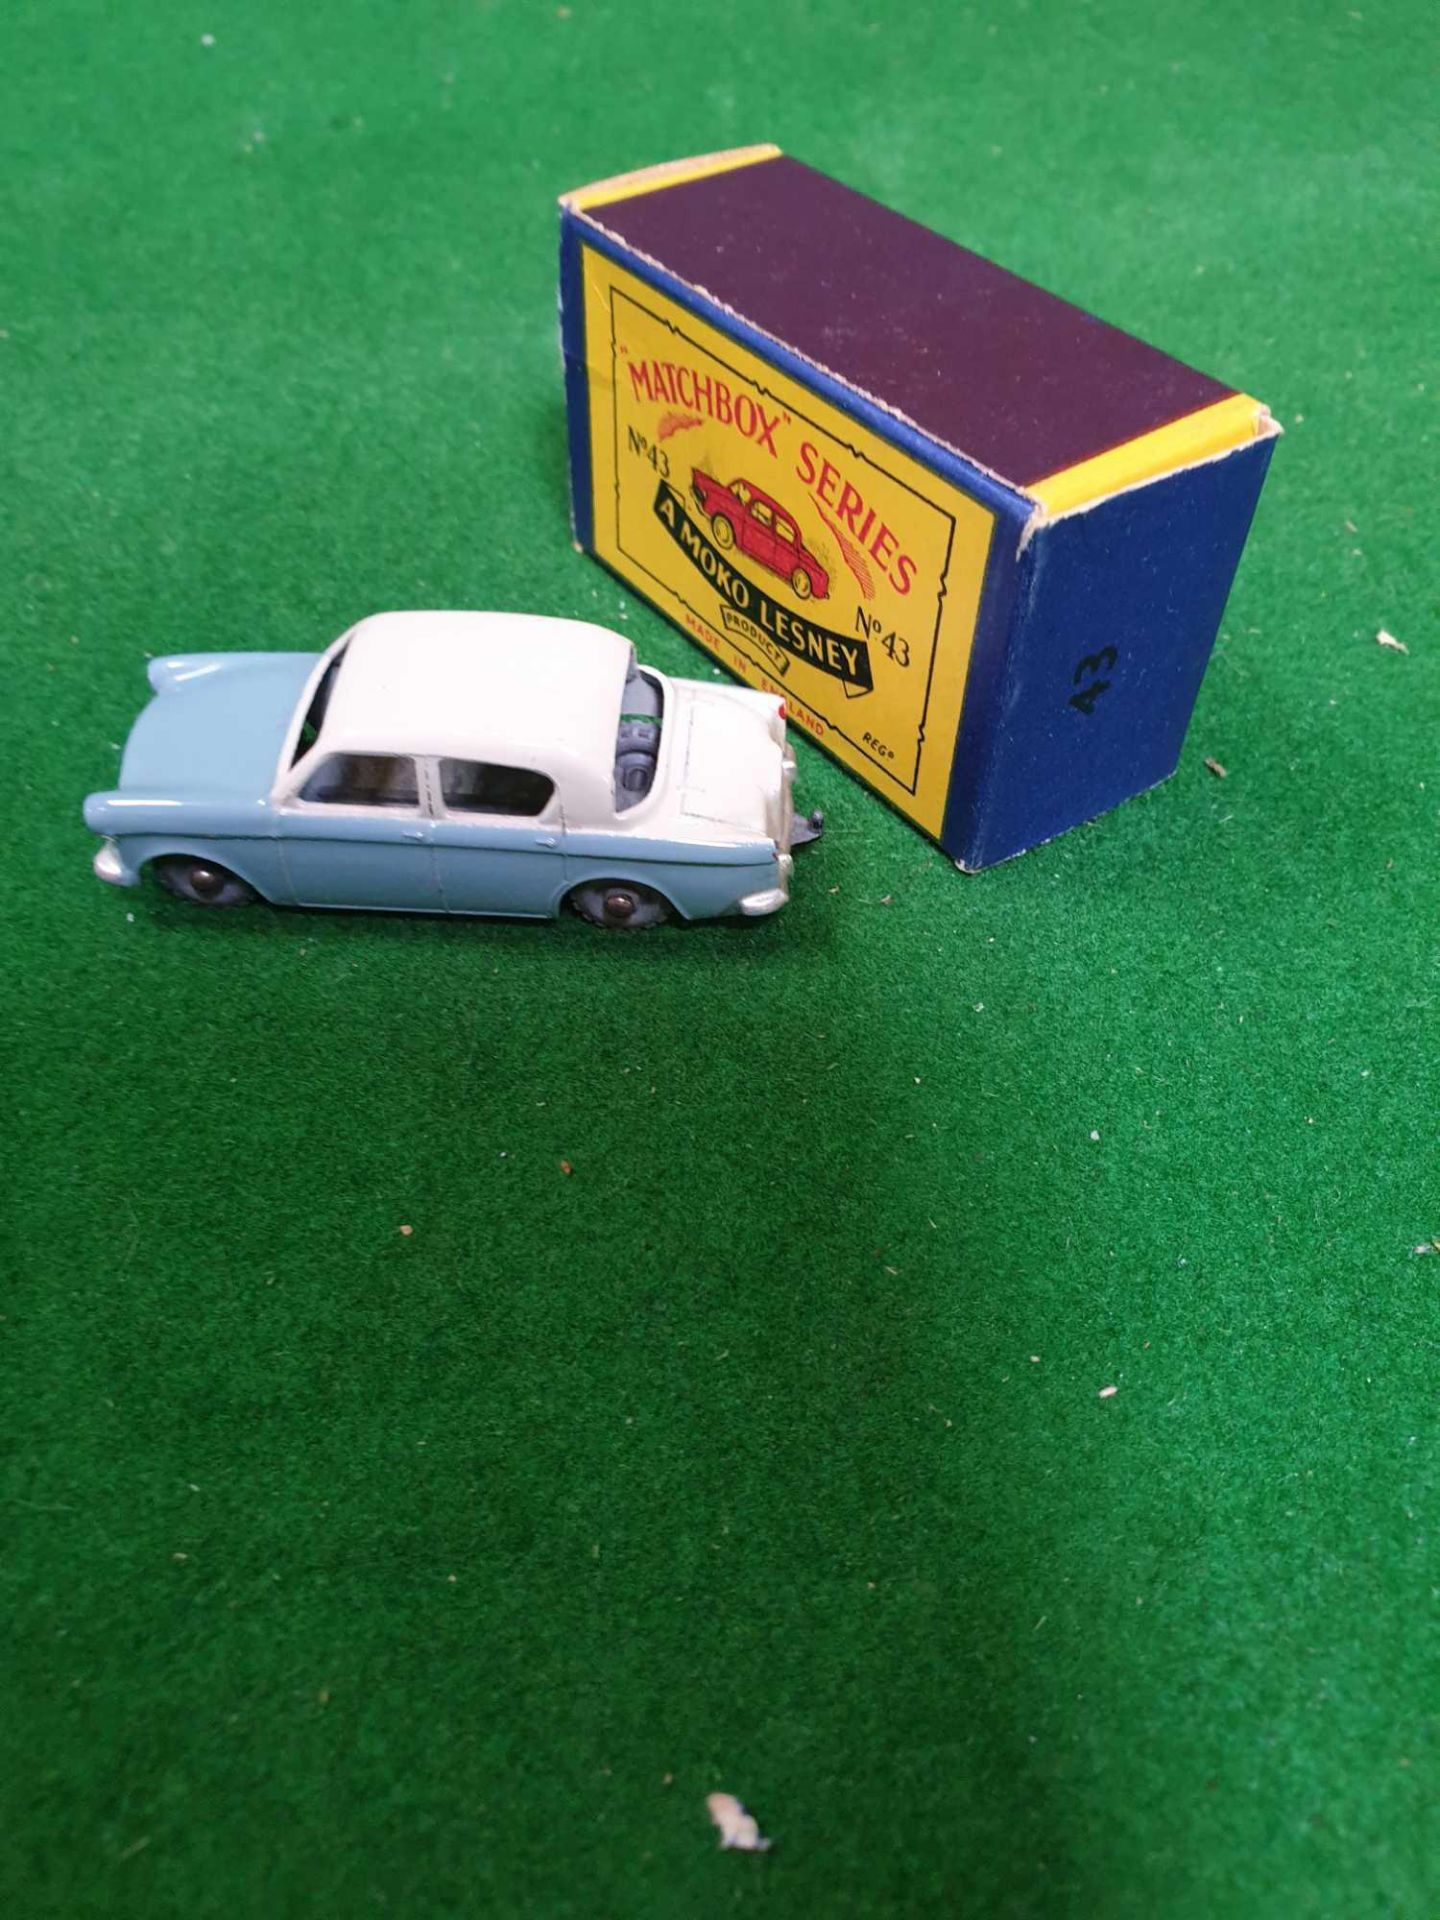 Matchbox Moko Lesney #43a Hillman Minx Two Tone Blue With Cream Roof Mint Model Firm Box 1959-1960 - Image 2 of 3